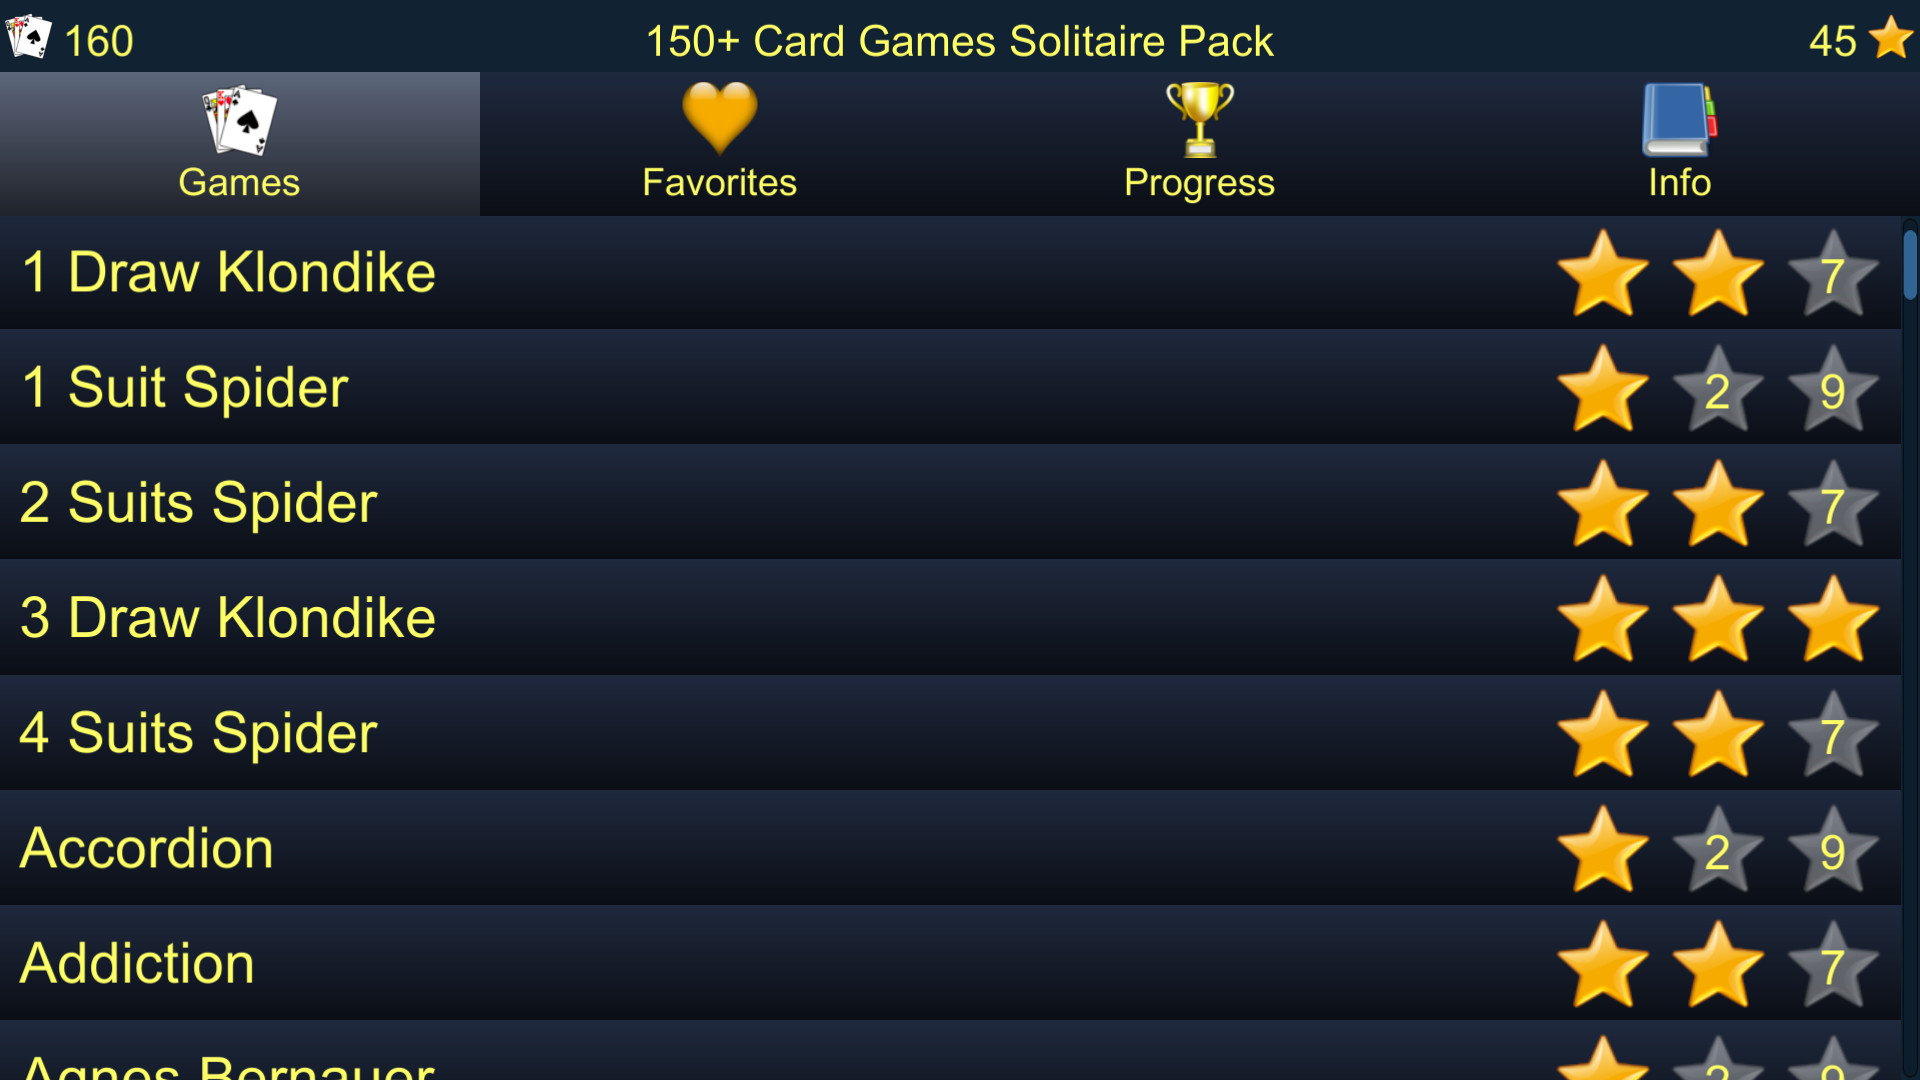 150+ Card Games Solitaire Pack Steam CD Key [USD 0.63]